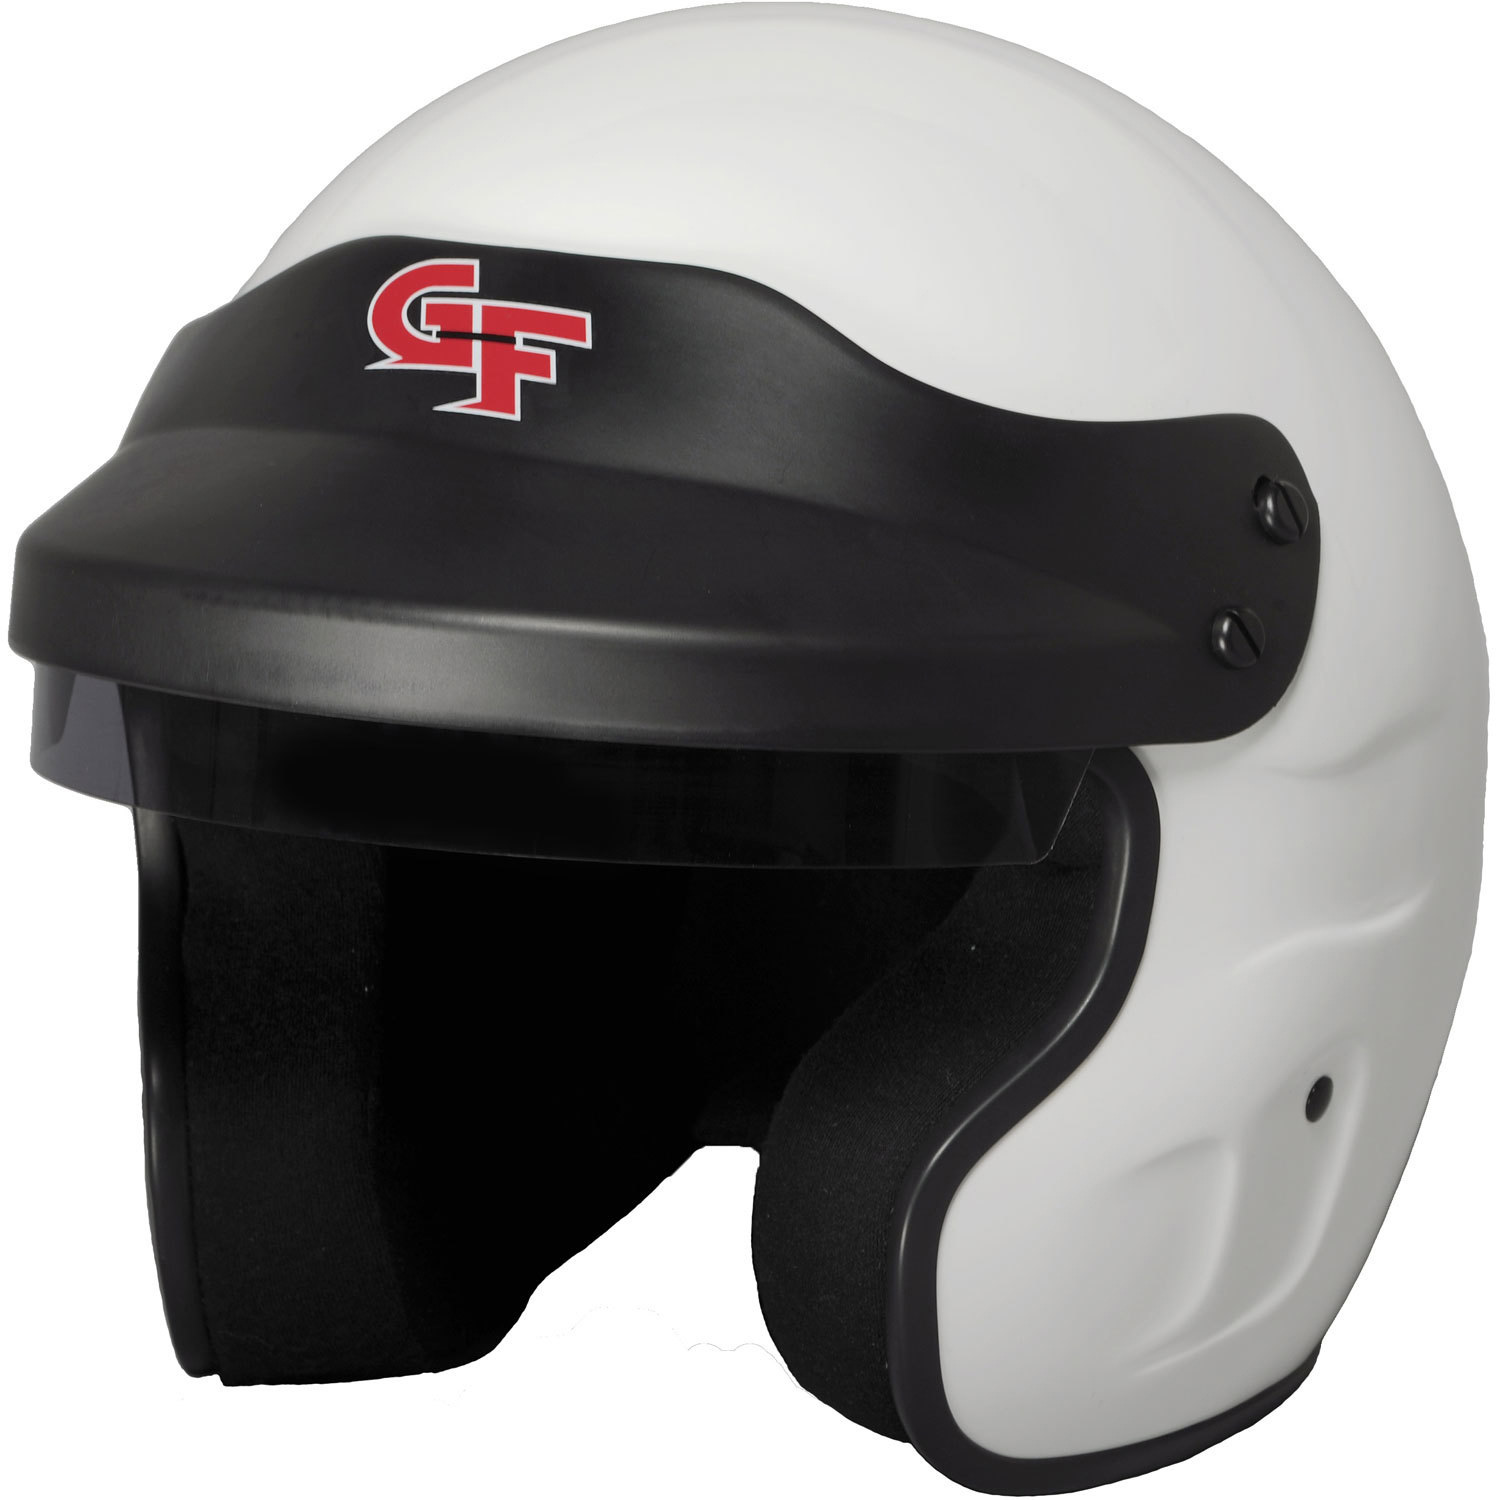 G-Force Racing Gear 13002MEDWH Helmet, GF1, Open Face, Snell SA2020, Head and Neck Support Ready, White, Medium, Each